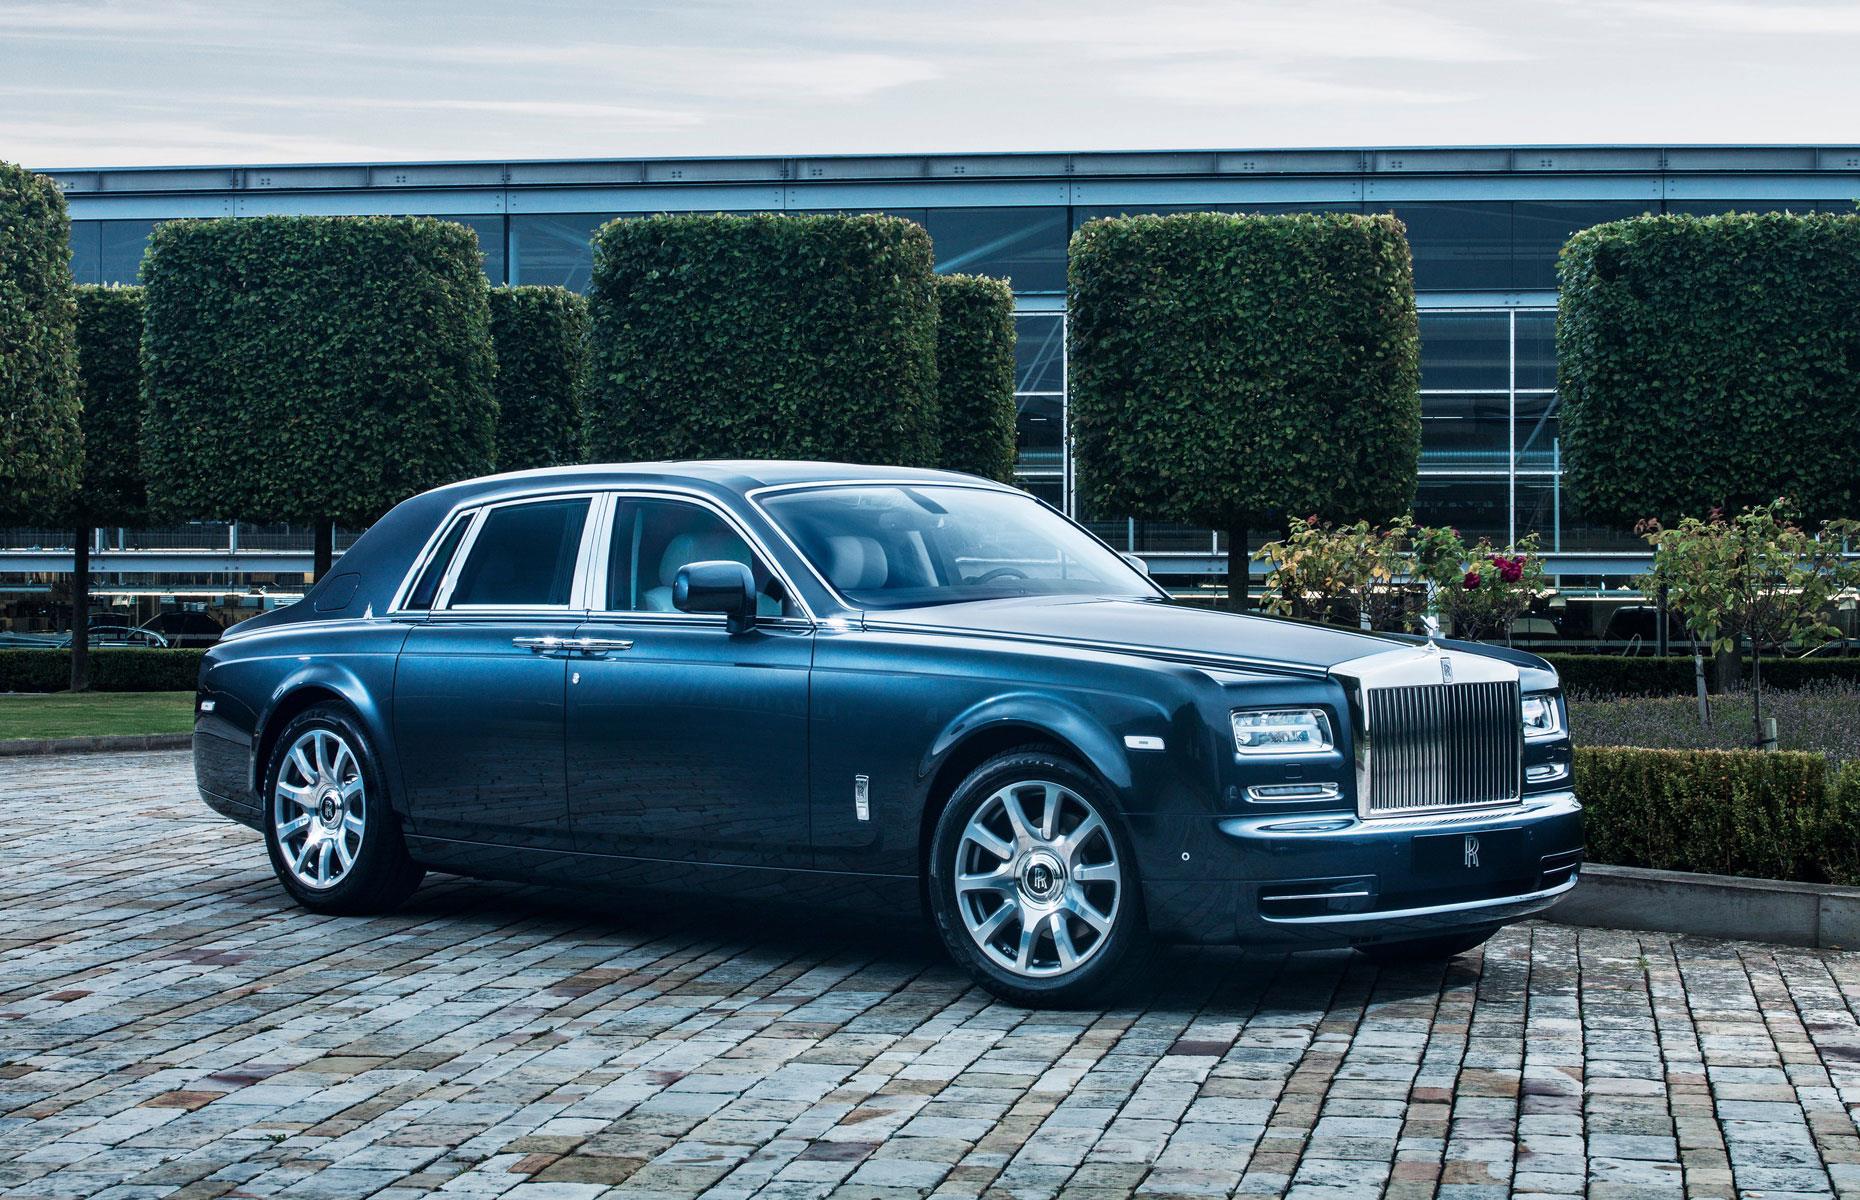 <p>Now for some classic and supercar eye candy. First up is Donald Trump's 2015 Rolls-Royce Phantom, for which he is likely to have paid something in the region of $500,000 (£324k). The vehicle of choice for the billionaire who values old-school elegance, the grand car is the priciest in Trump's collection.</p>